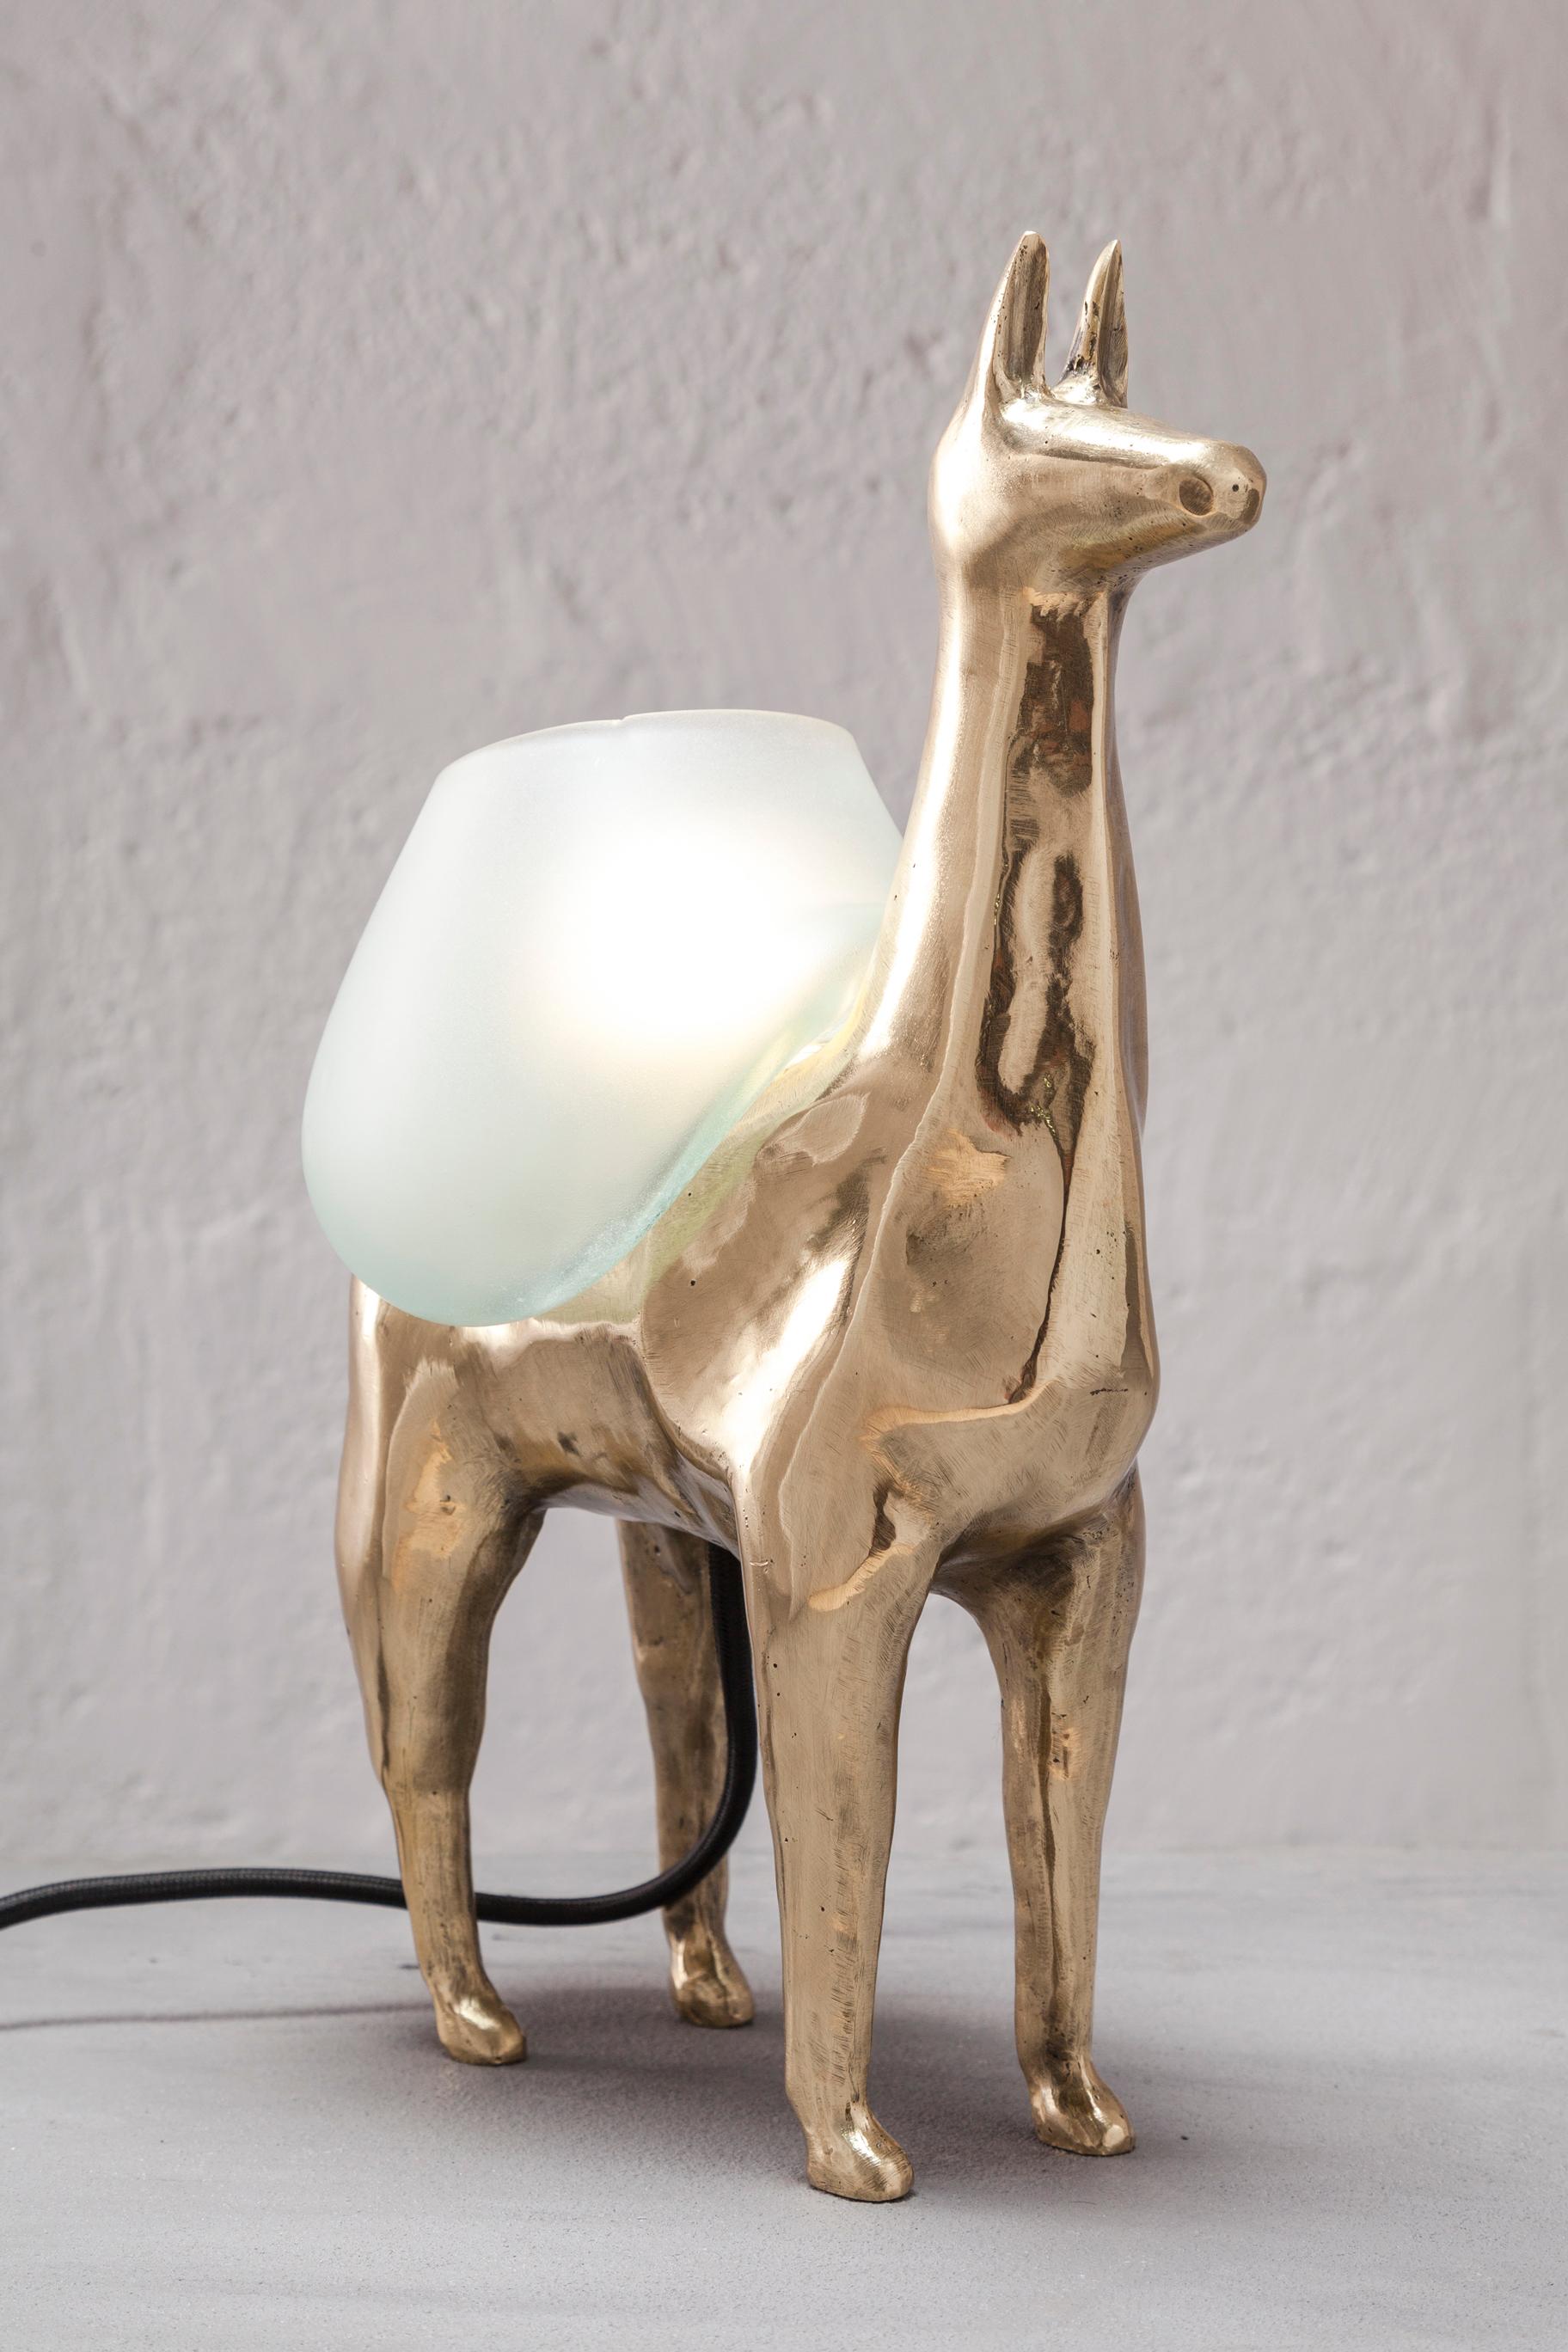 LLAMA is a table lamp, composed of a lost-wax cast bronze body, and a handblown glass lampshade. It is a reinterpretation of an archetype of llama sculptures essential within Ecuadorian artisanship. The form was hand-sculpted in ceramic, then 3D